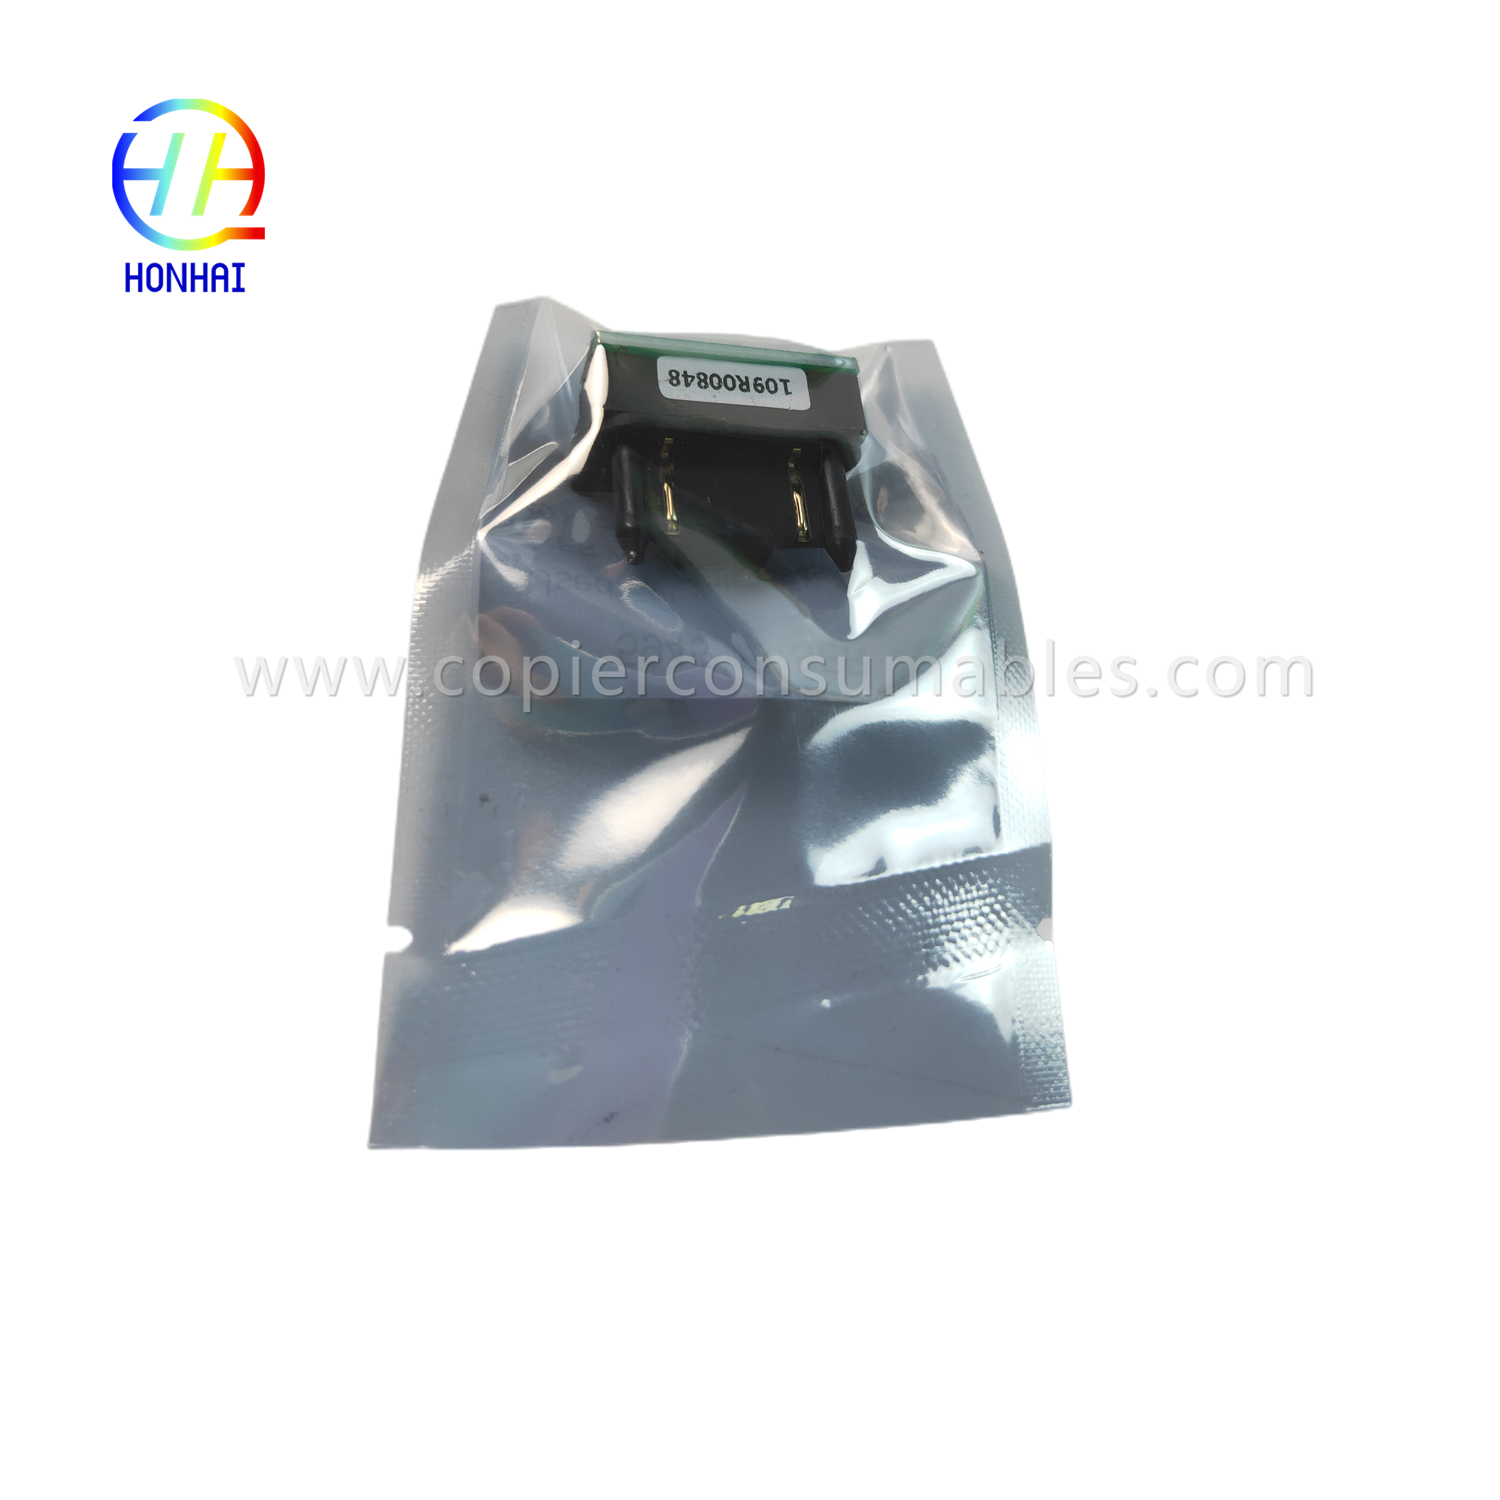 https://c585.goodo.net/fuser-chip-for-xerox-workcentre-5945-5955-109r00848-chip-2-product/